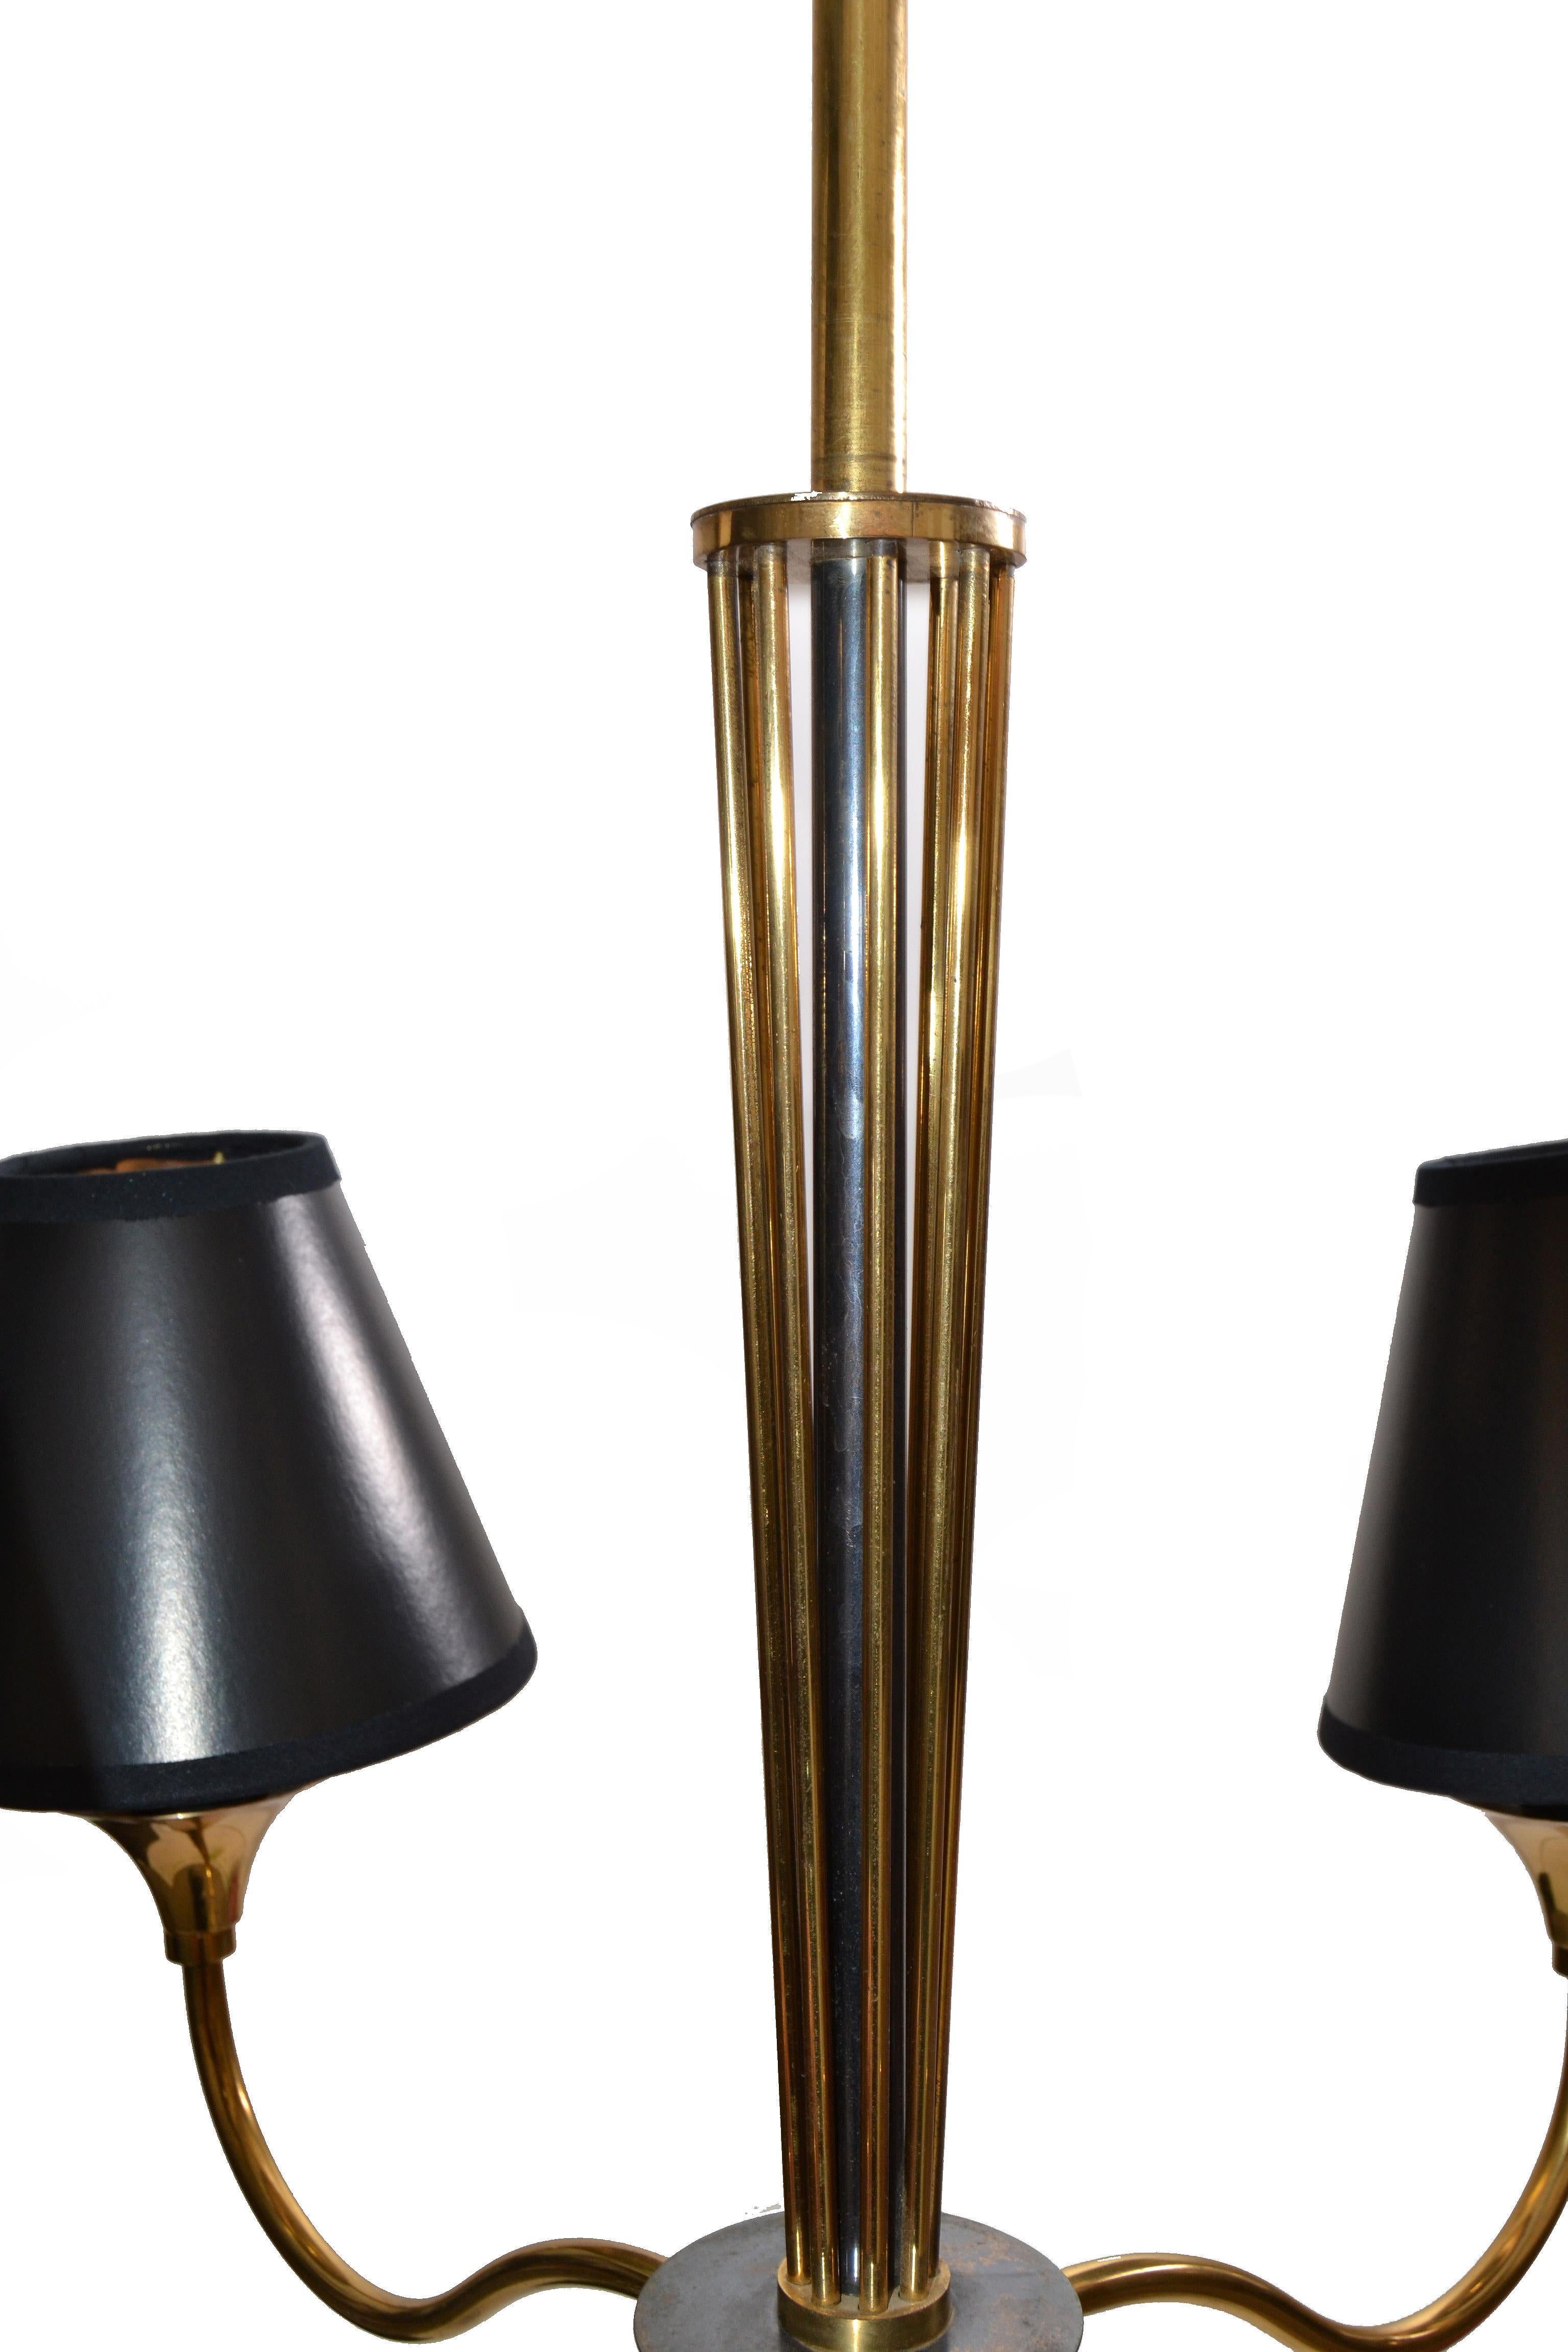 Maison Lunel Four-Light Chandelier Brass and Gun Metal French Mid-Century Modern For Sale 1